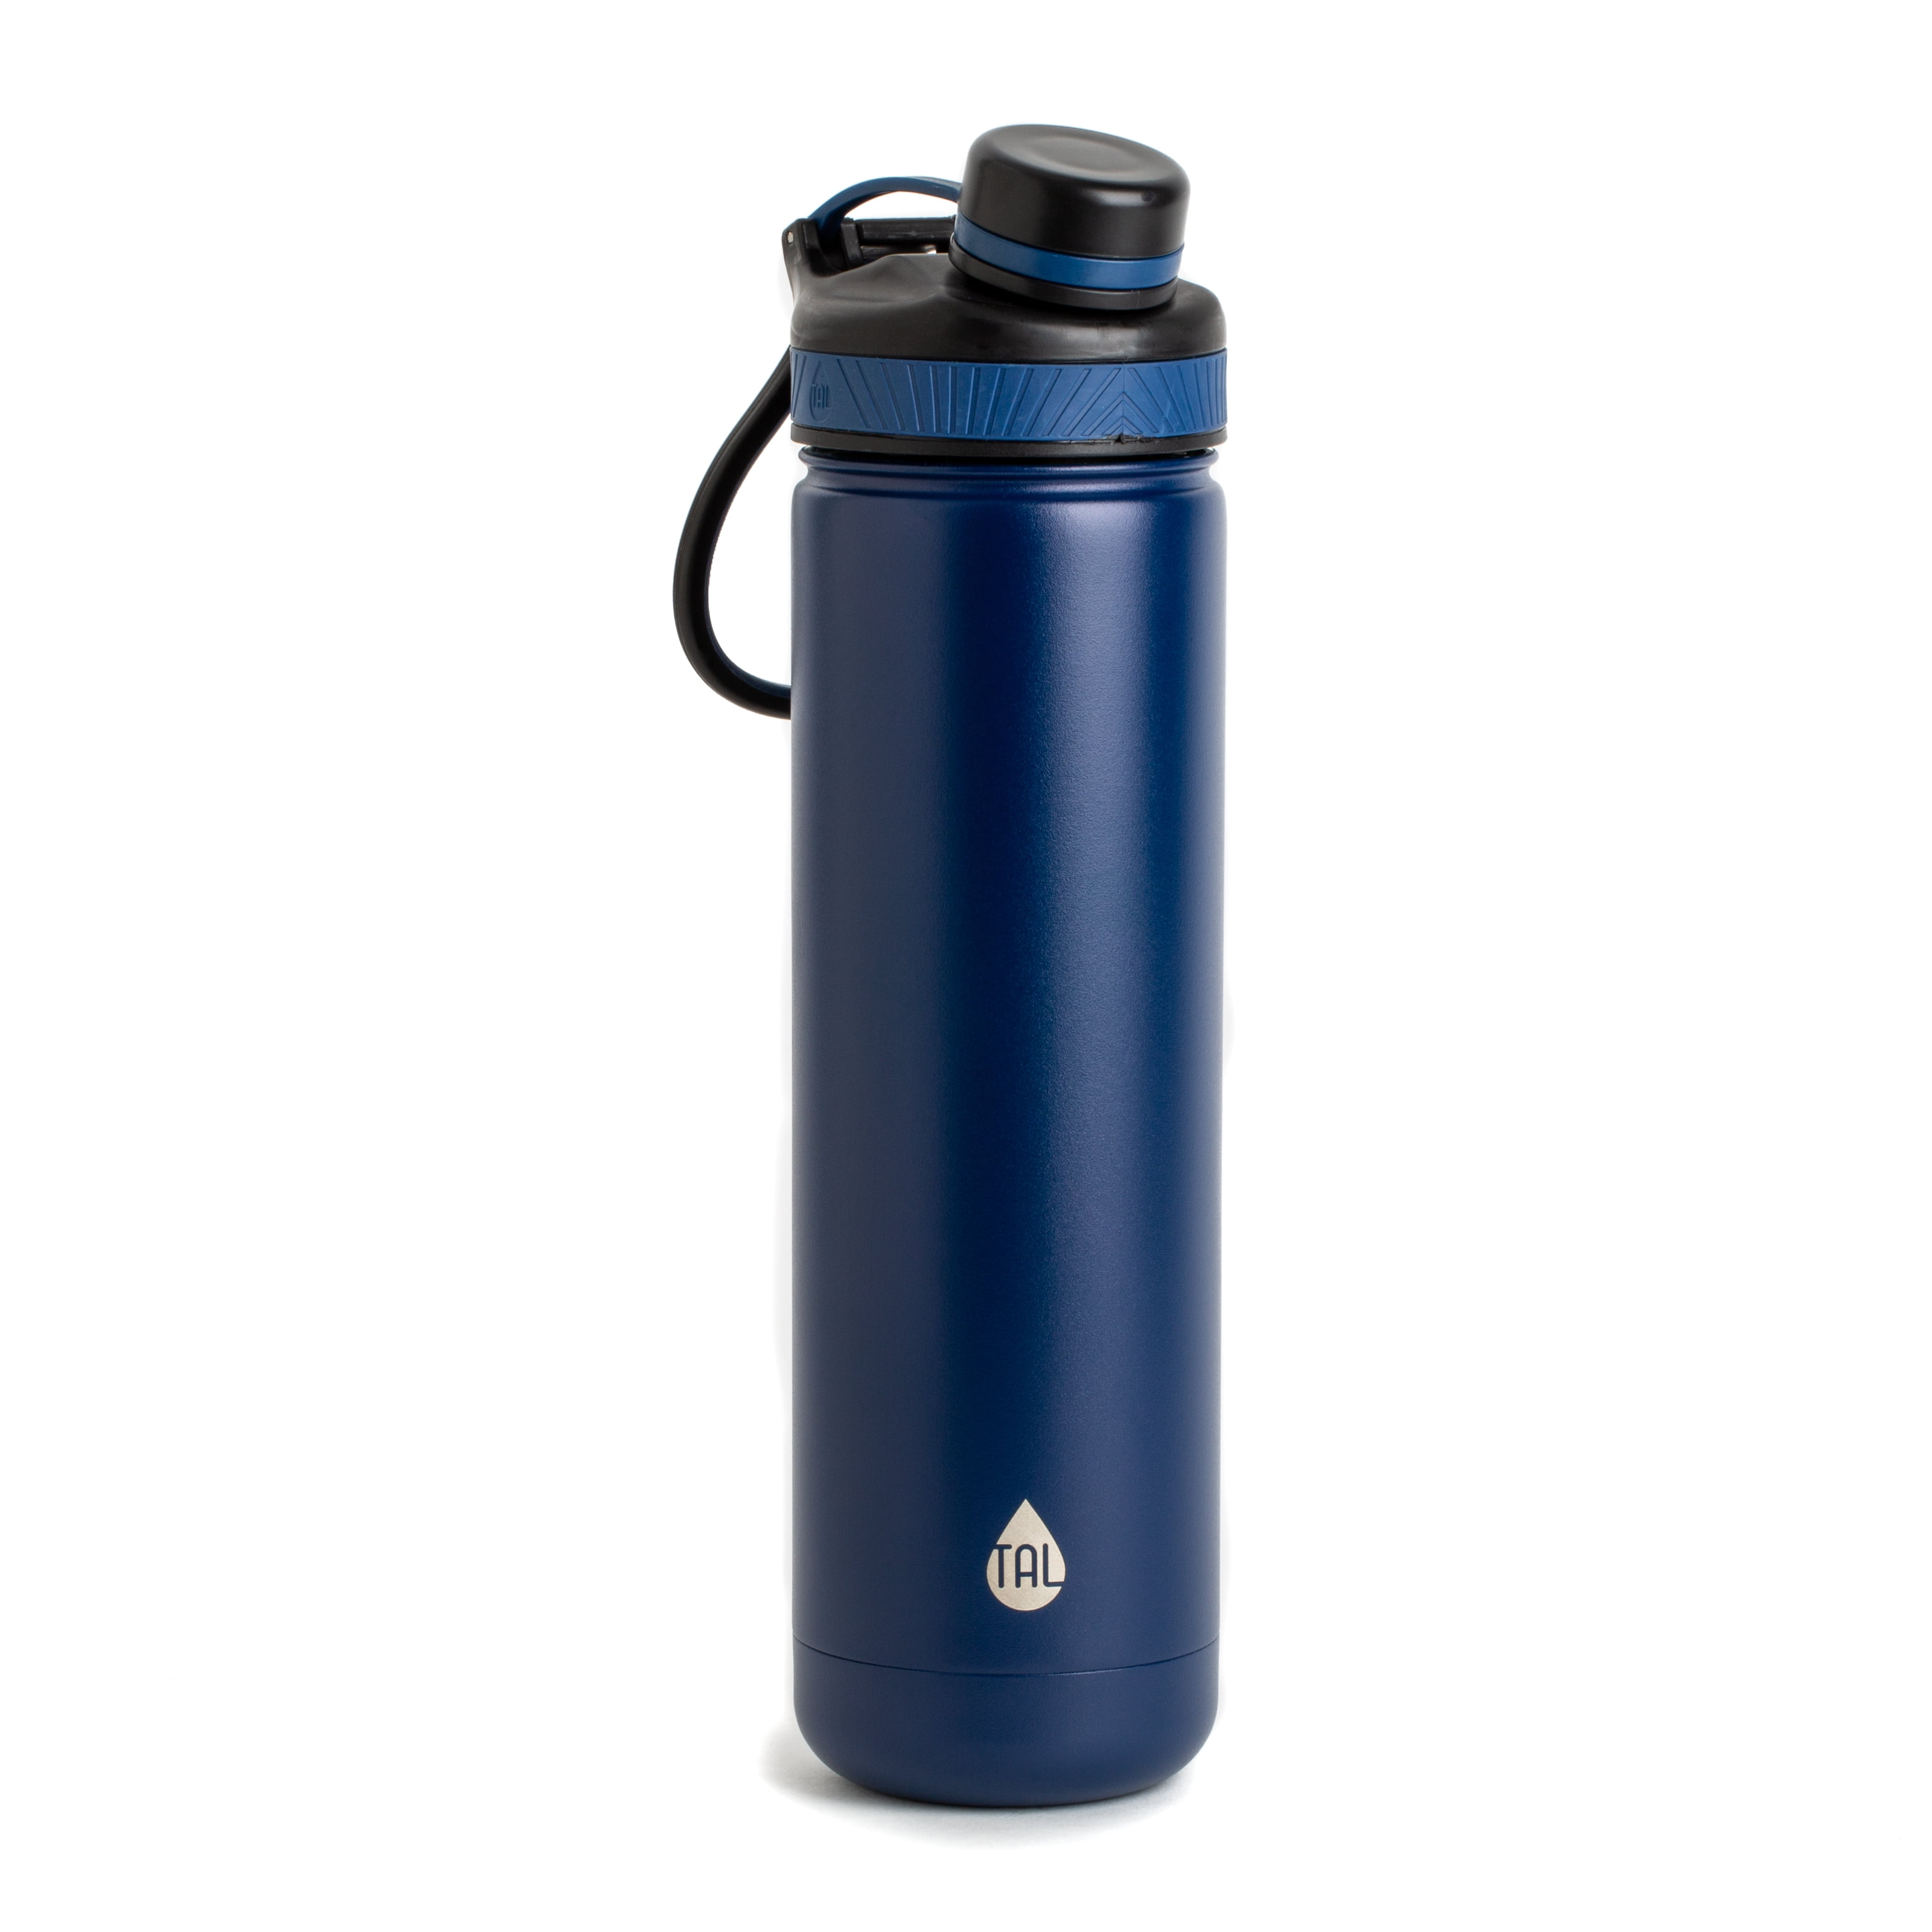 TAL 26oz Double Wall Vacuum Insulated Stainless Steel Ranger? Pro Navy Tal Stainless Steel Ranger Pro